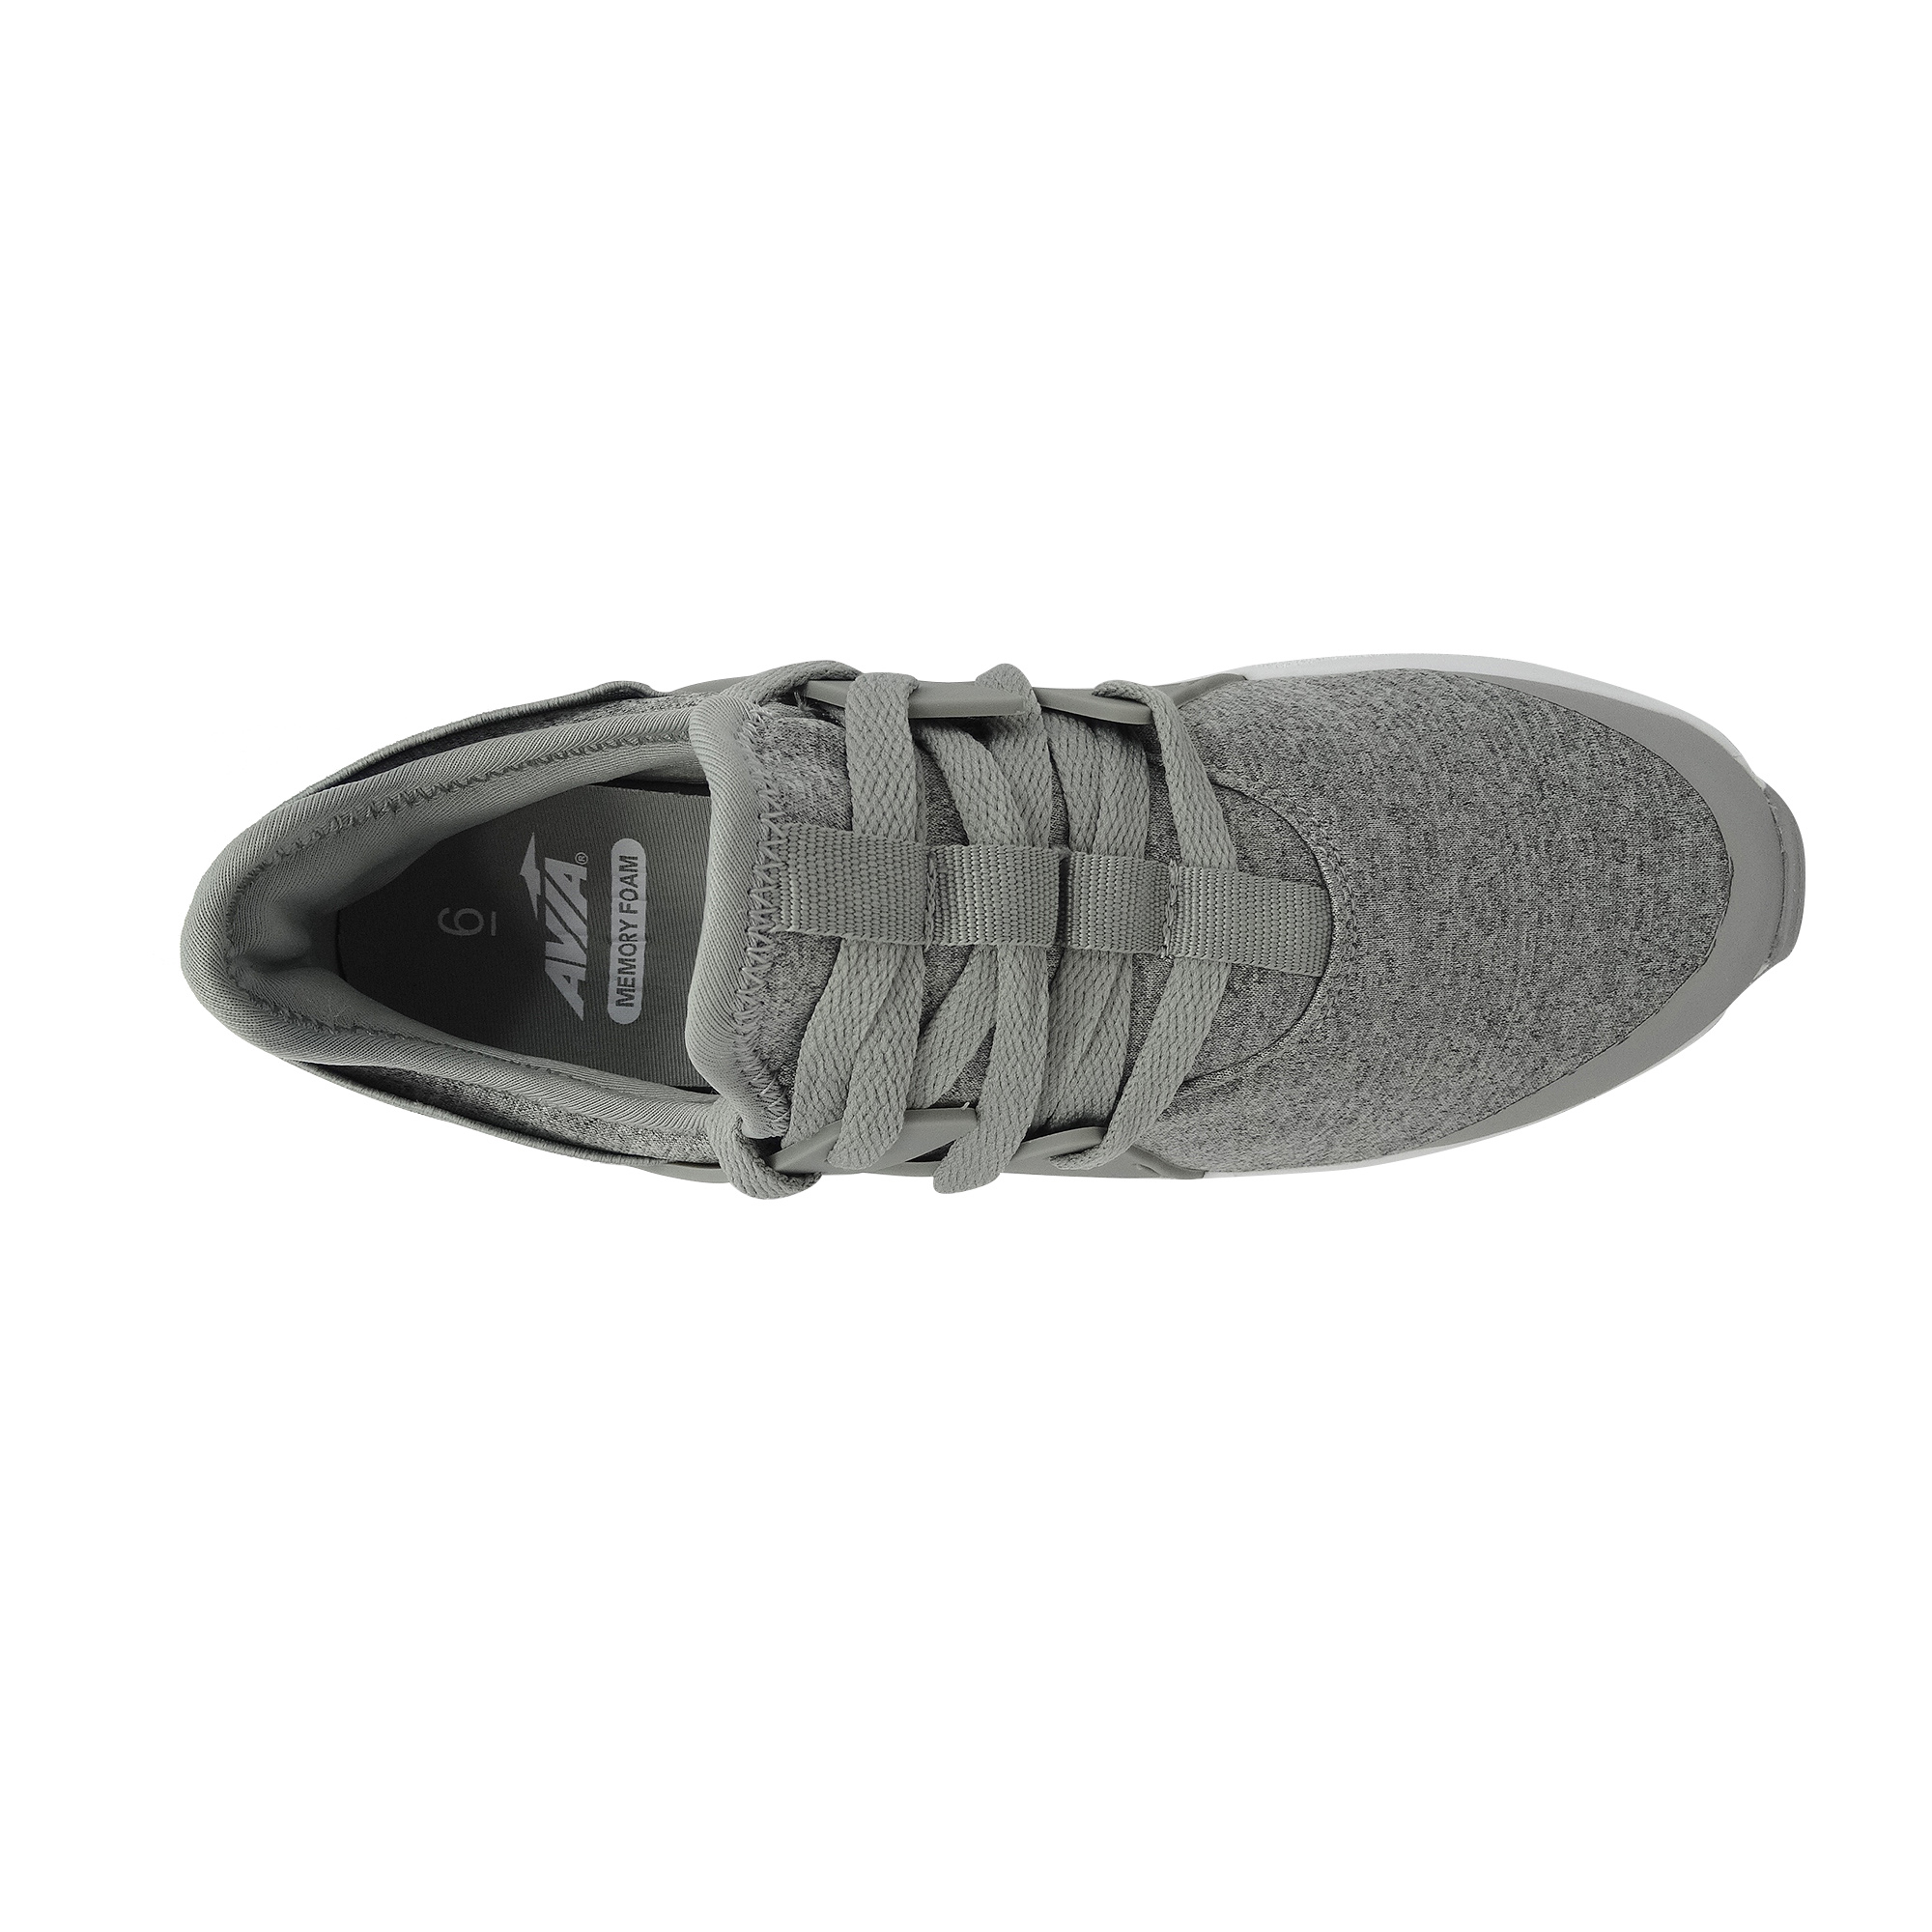 Women's Caged Mesh Athletic Shoe - image 4 of 5